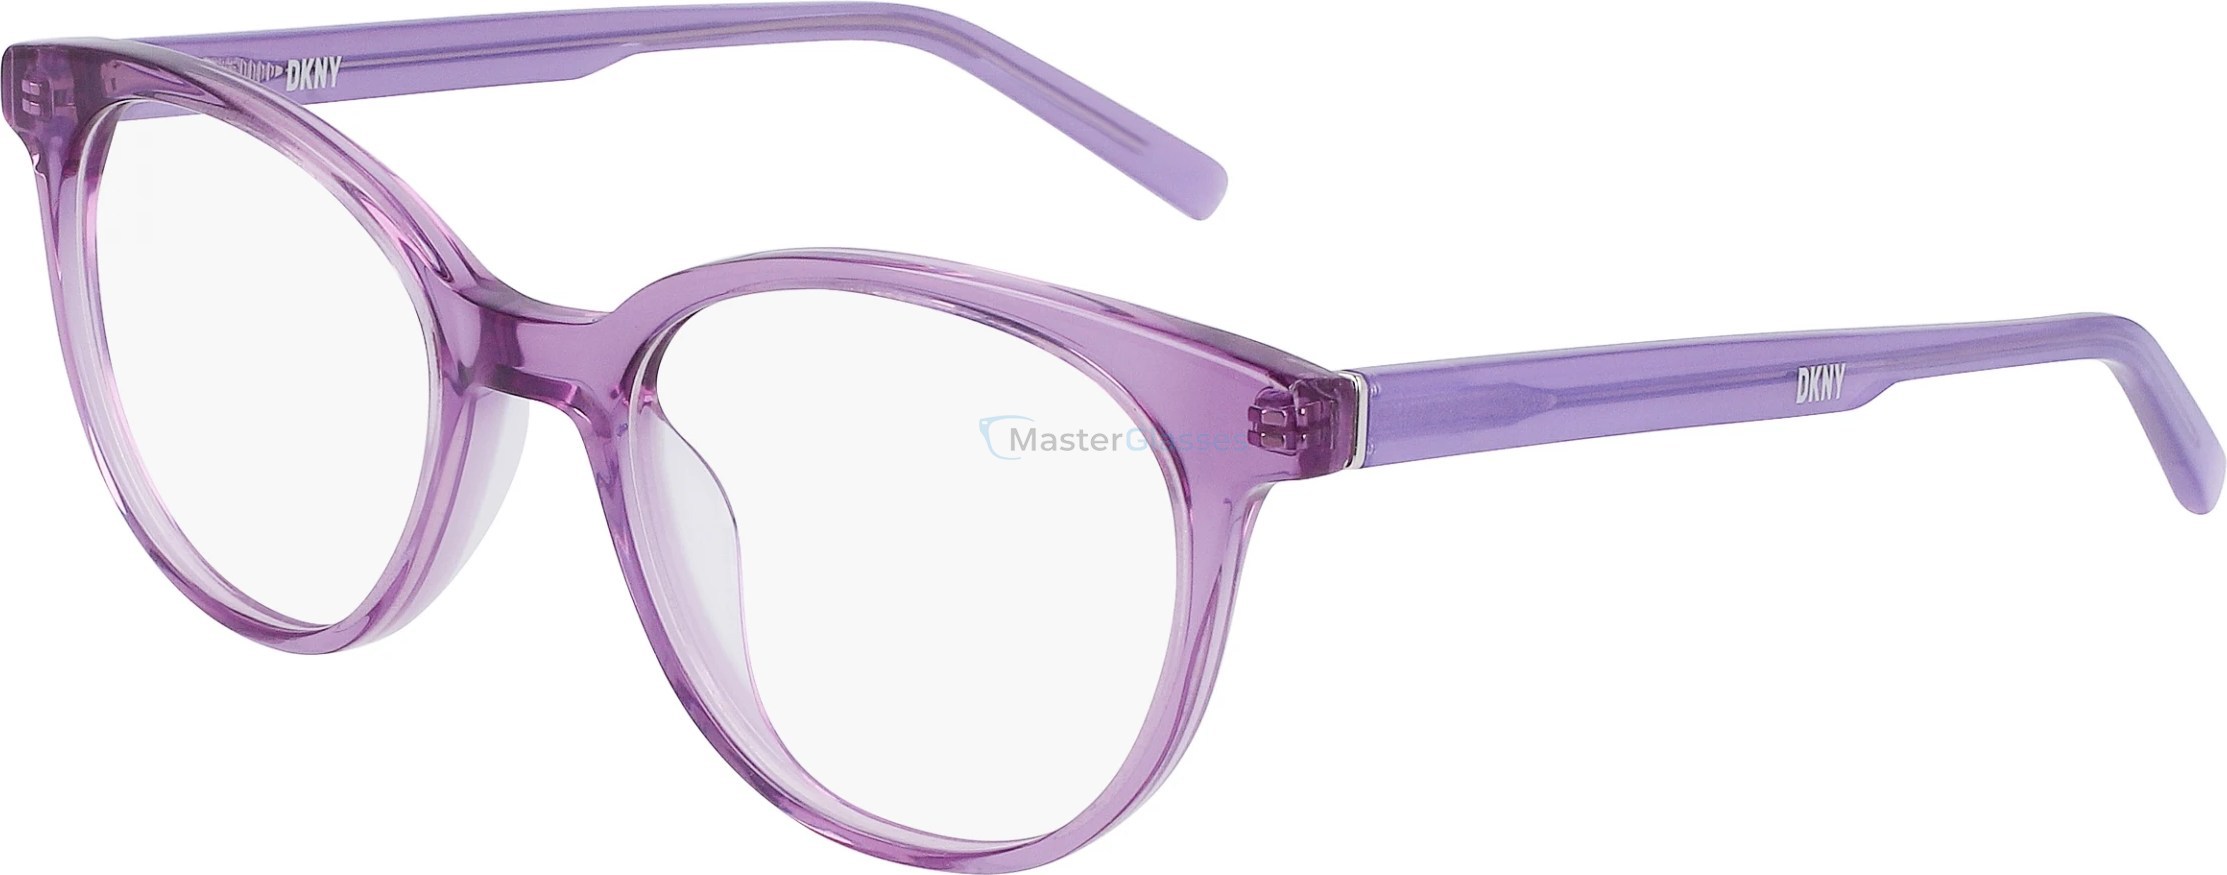  DKNY DK5050 550,  CRYSTAL ORCHID, CLEAR